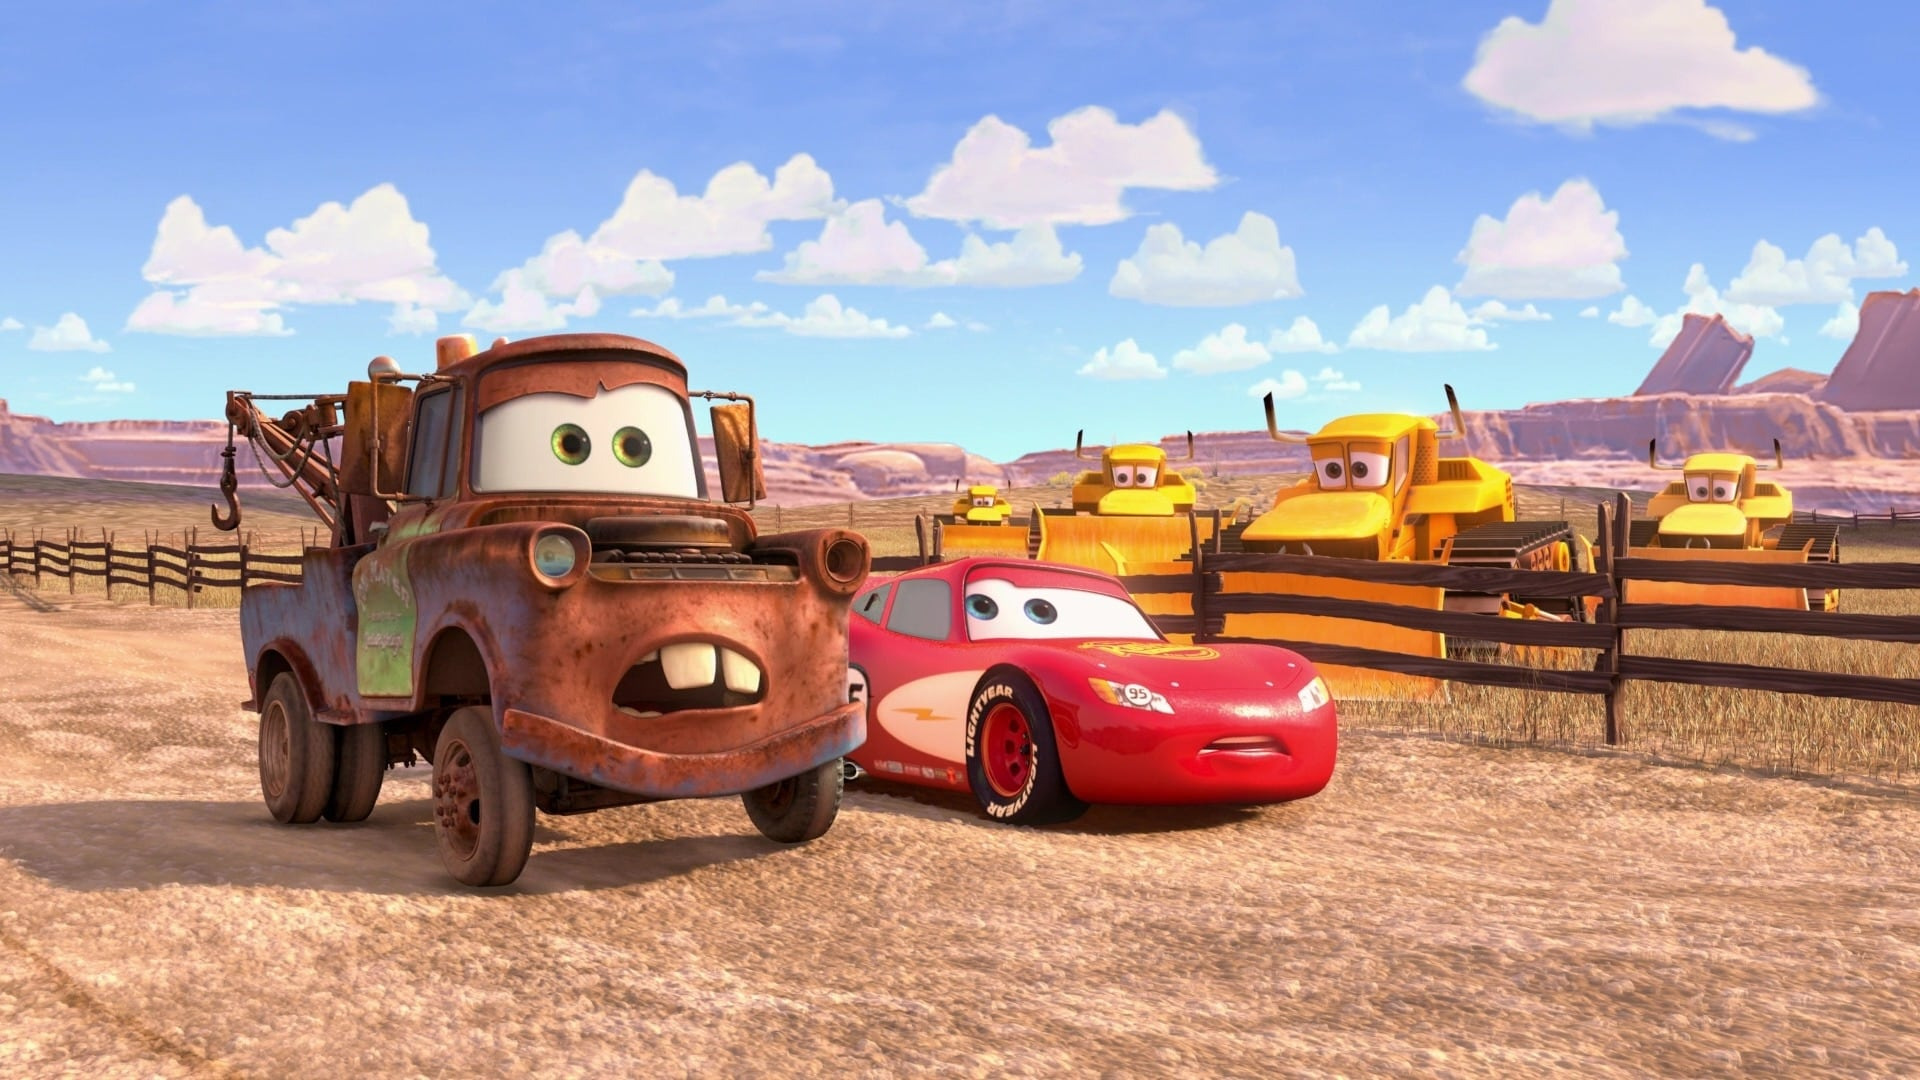 Show Mater's Tall Tales